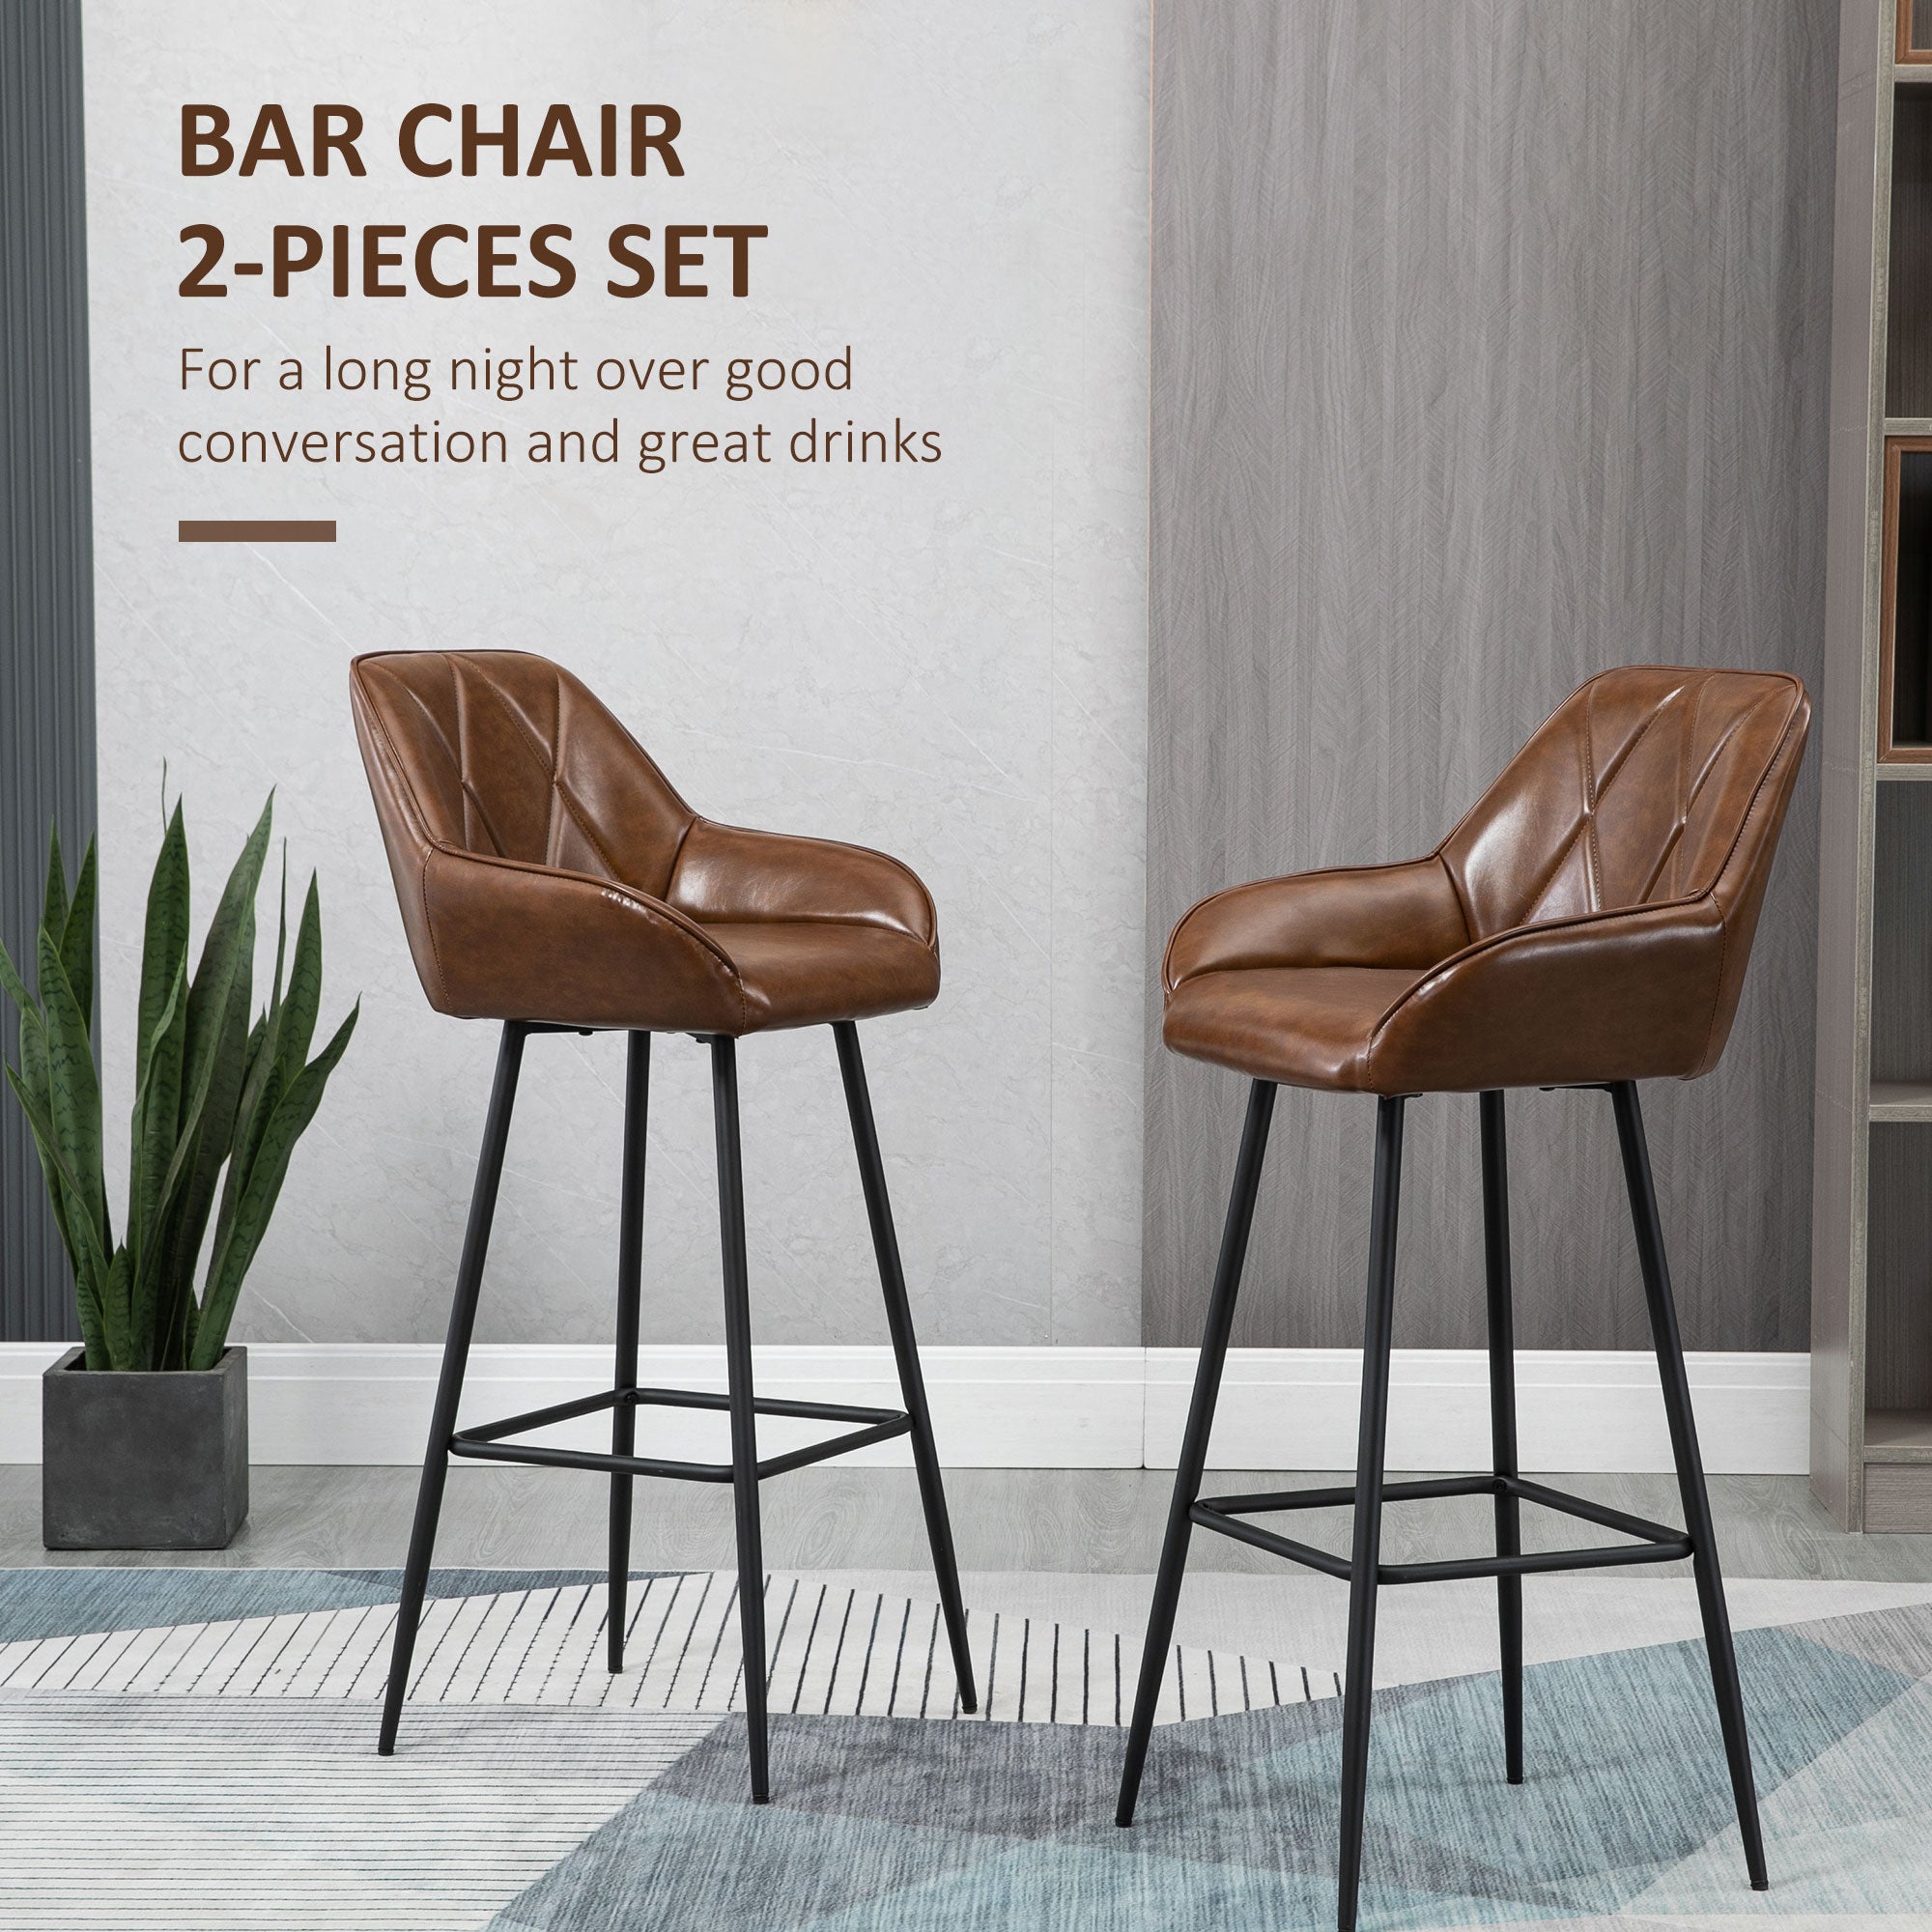 Retro Bar Stools Set of 2, Breakfast Bar Chairs with Footrest, Kitchen Stools with Backs and Steel Legs, for Dining Area and Home Bar, Brown  AOSOM   